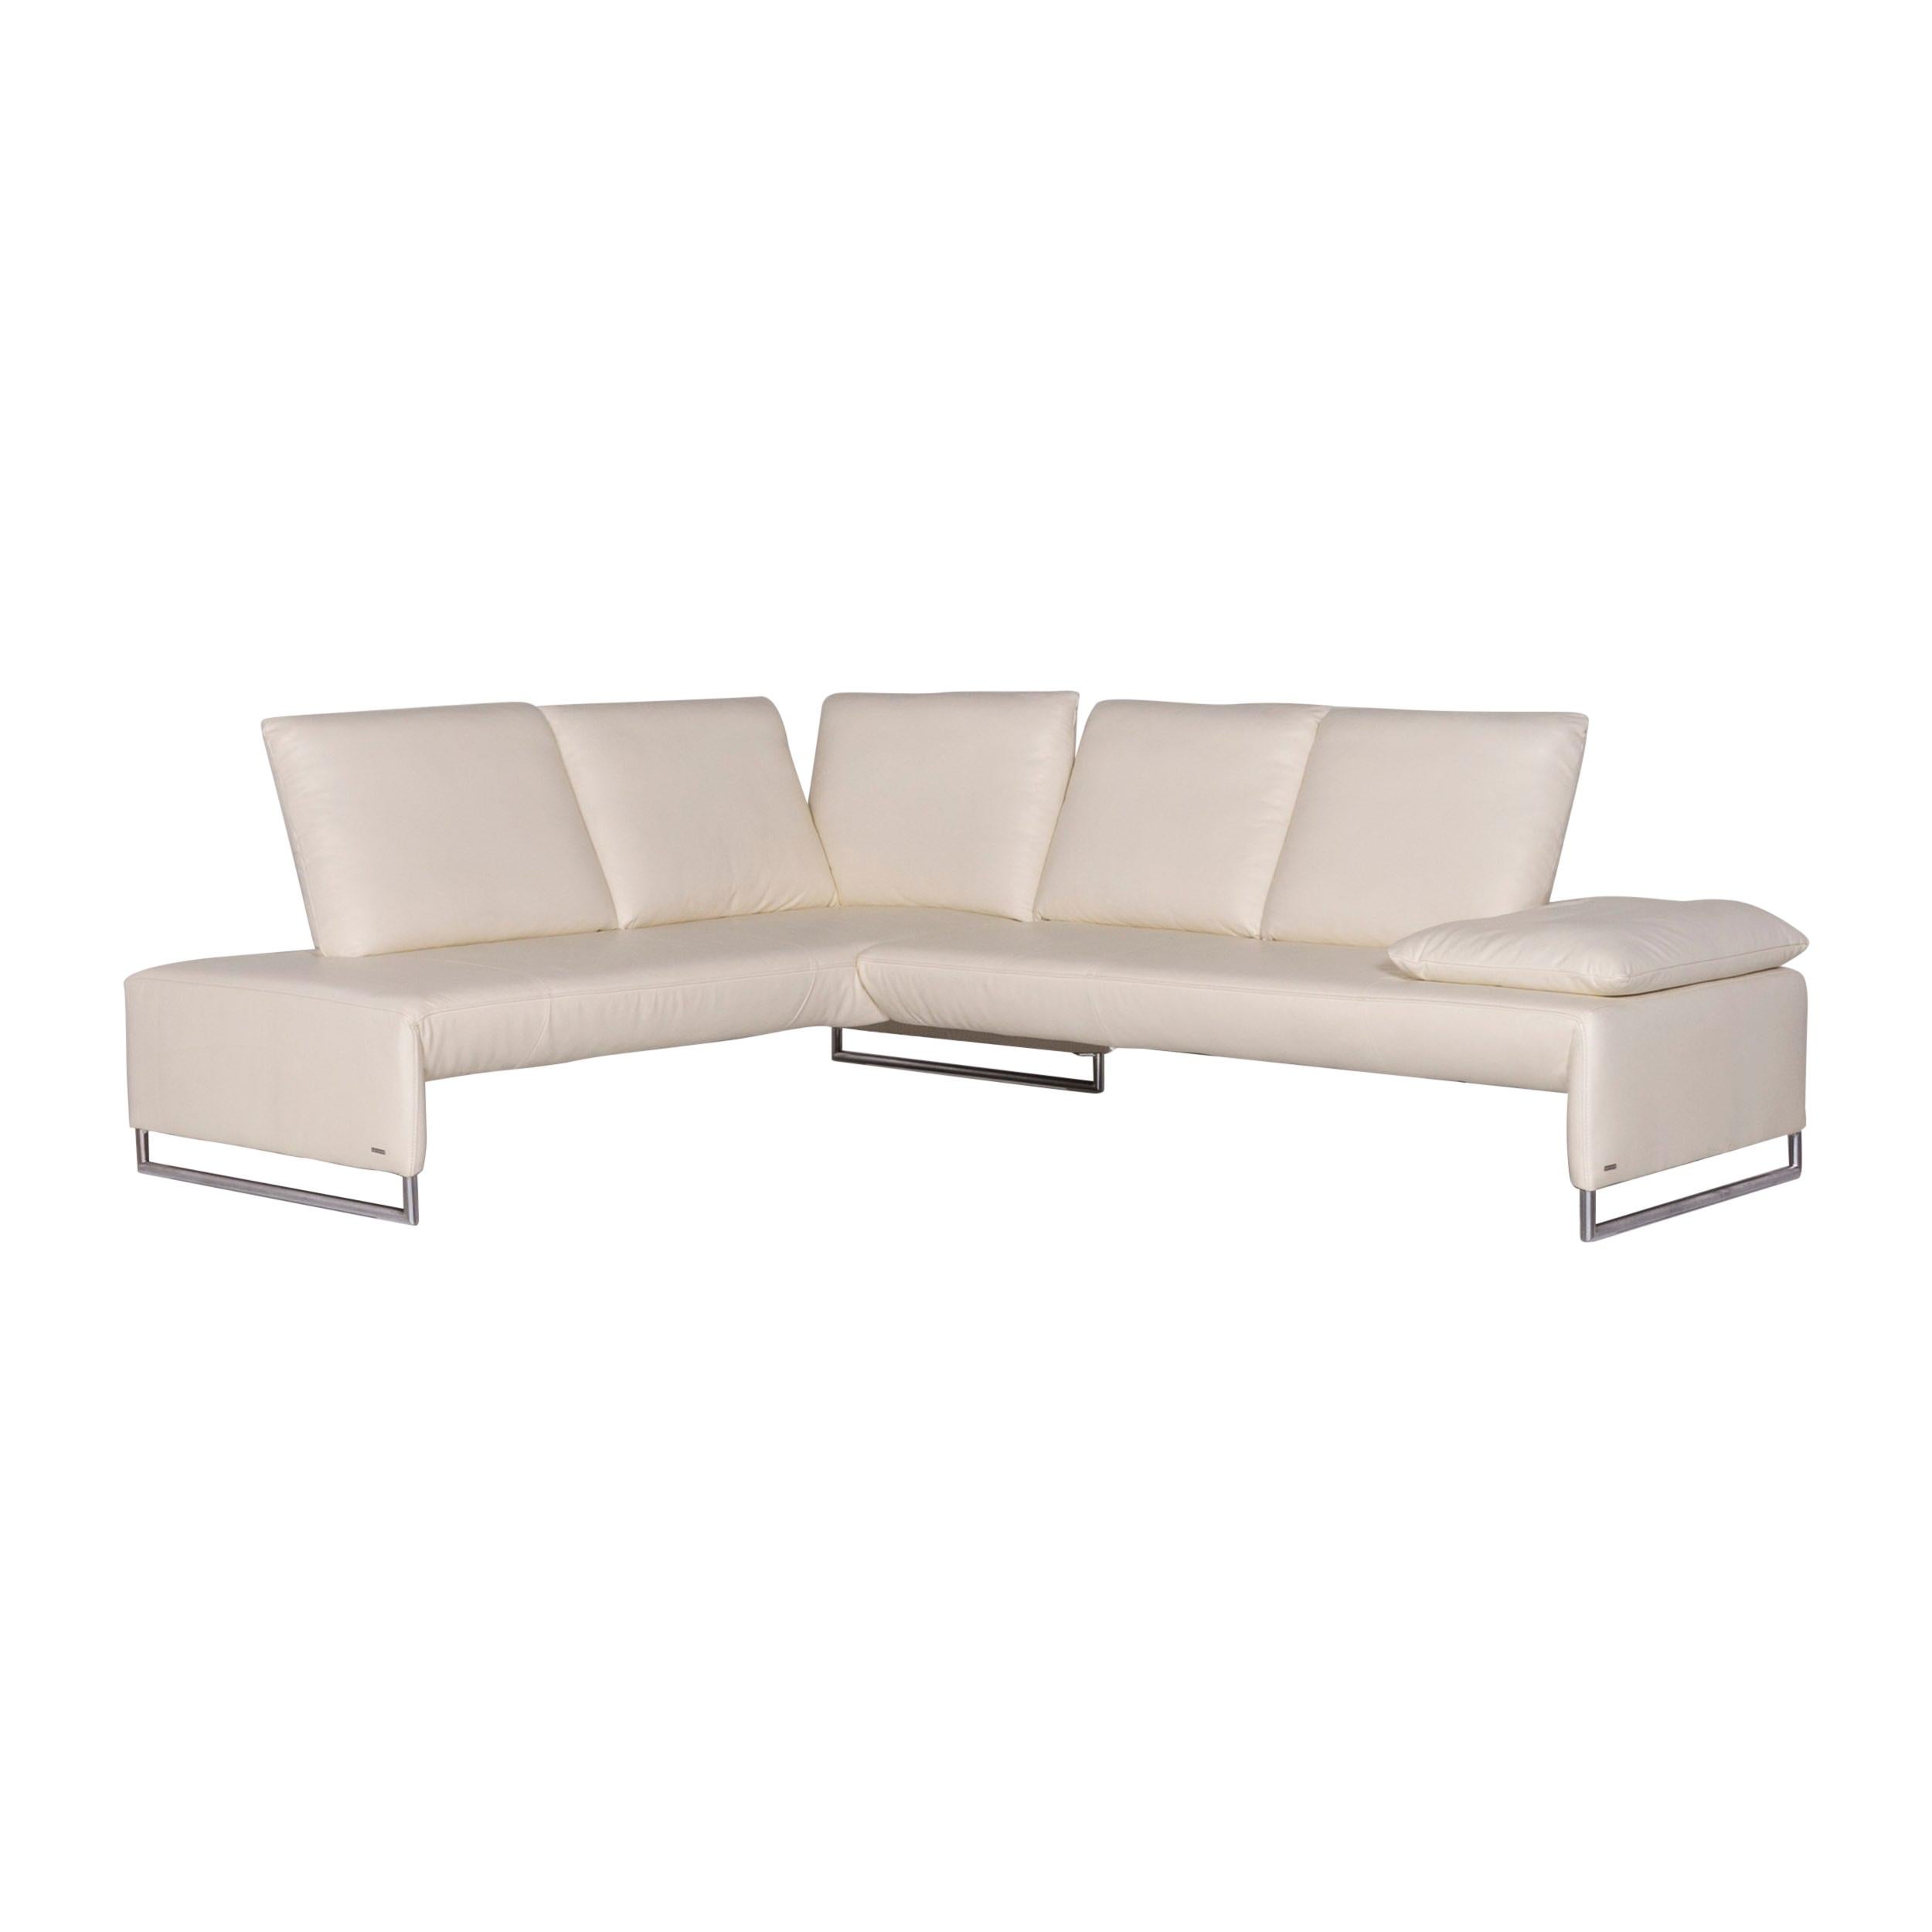 Koinor Leather Corner Sofa Cream Sofa Function Couch For Sale